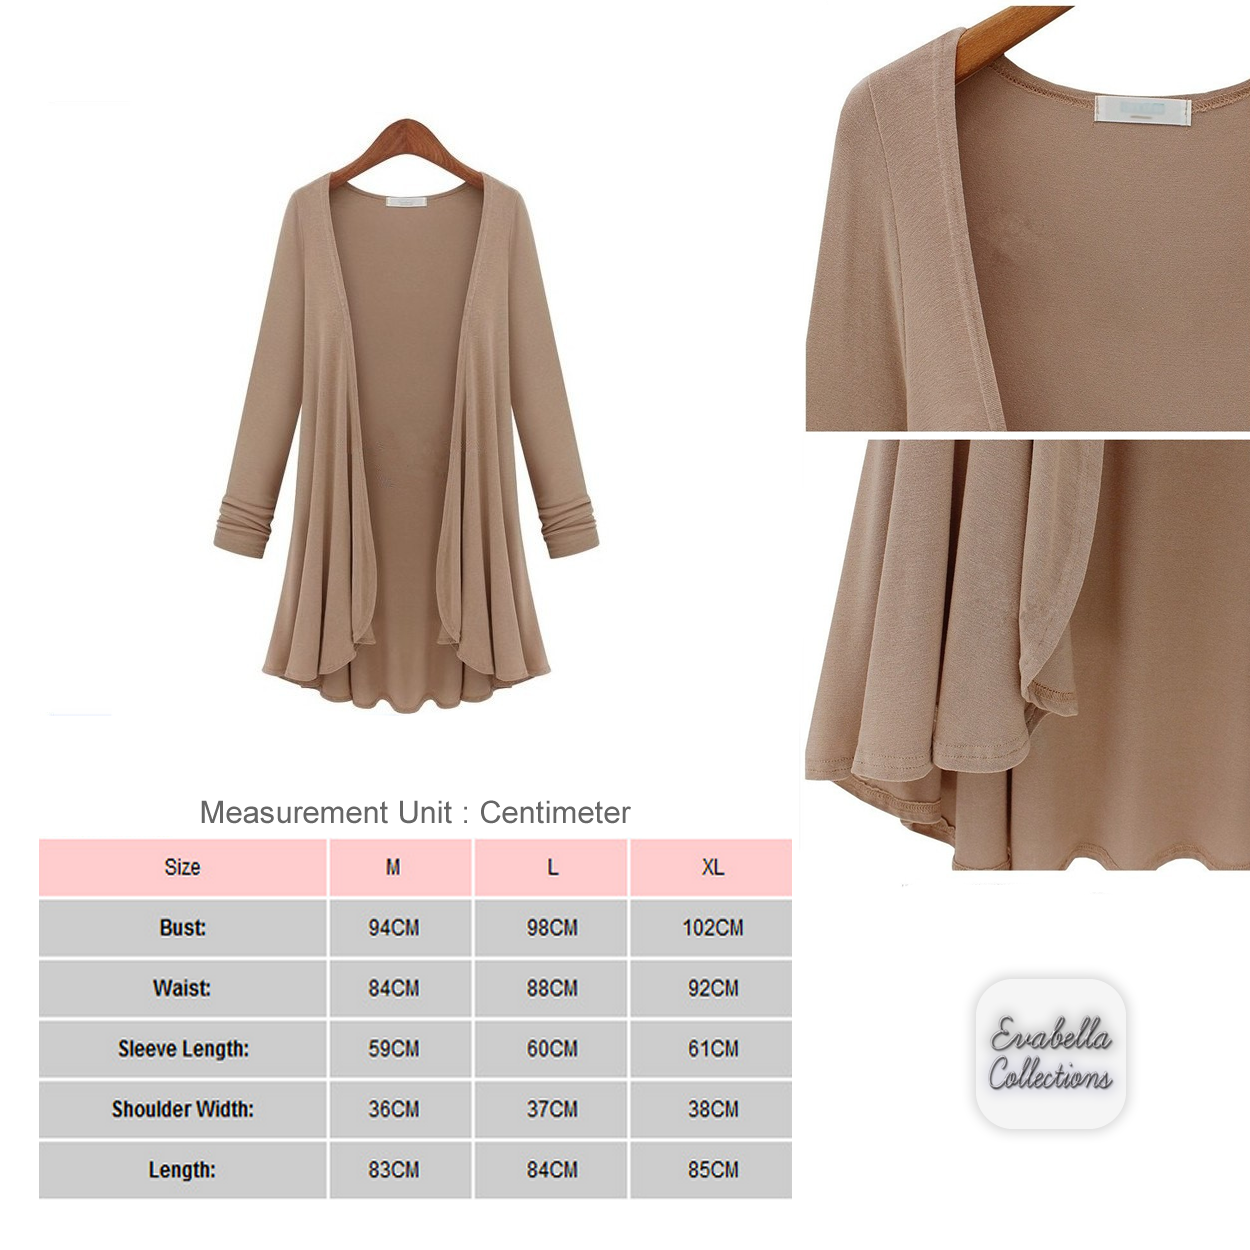 Lux Drapes Classic Cardigans In 5 Colors